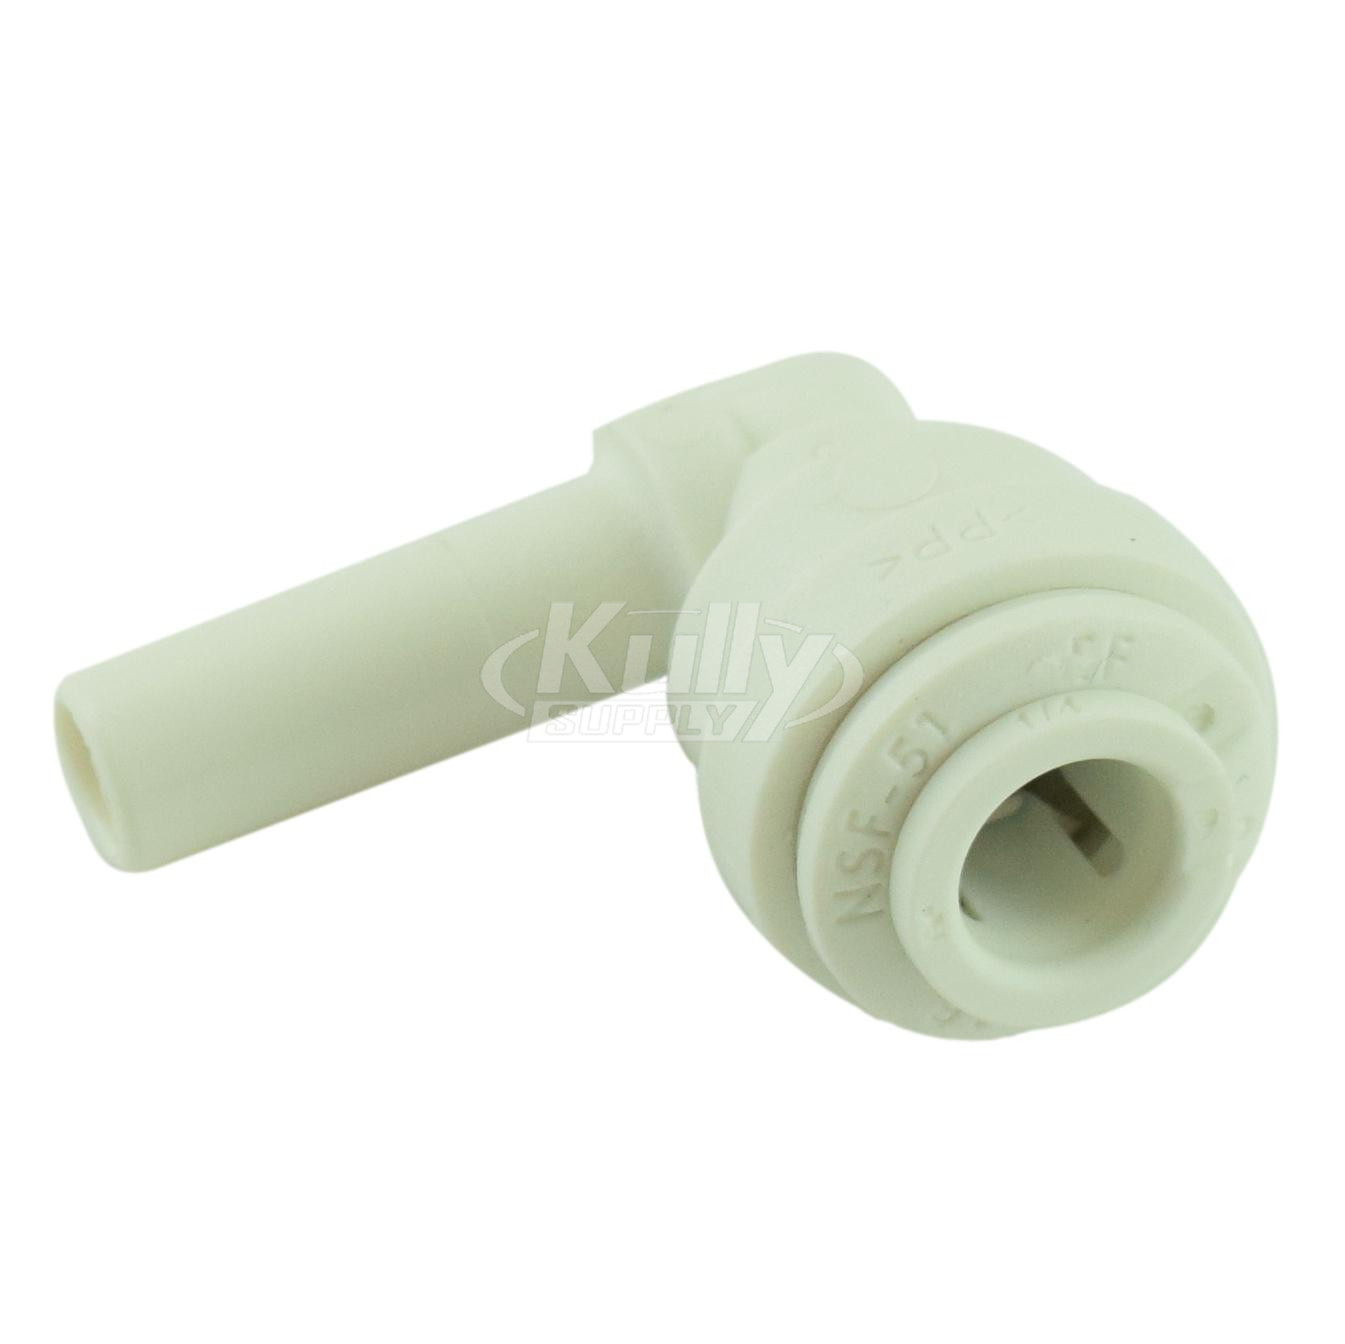 Oasis 029994-103 Plug In White Elbow Fitting